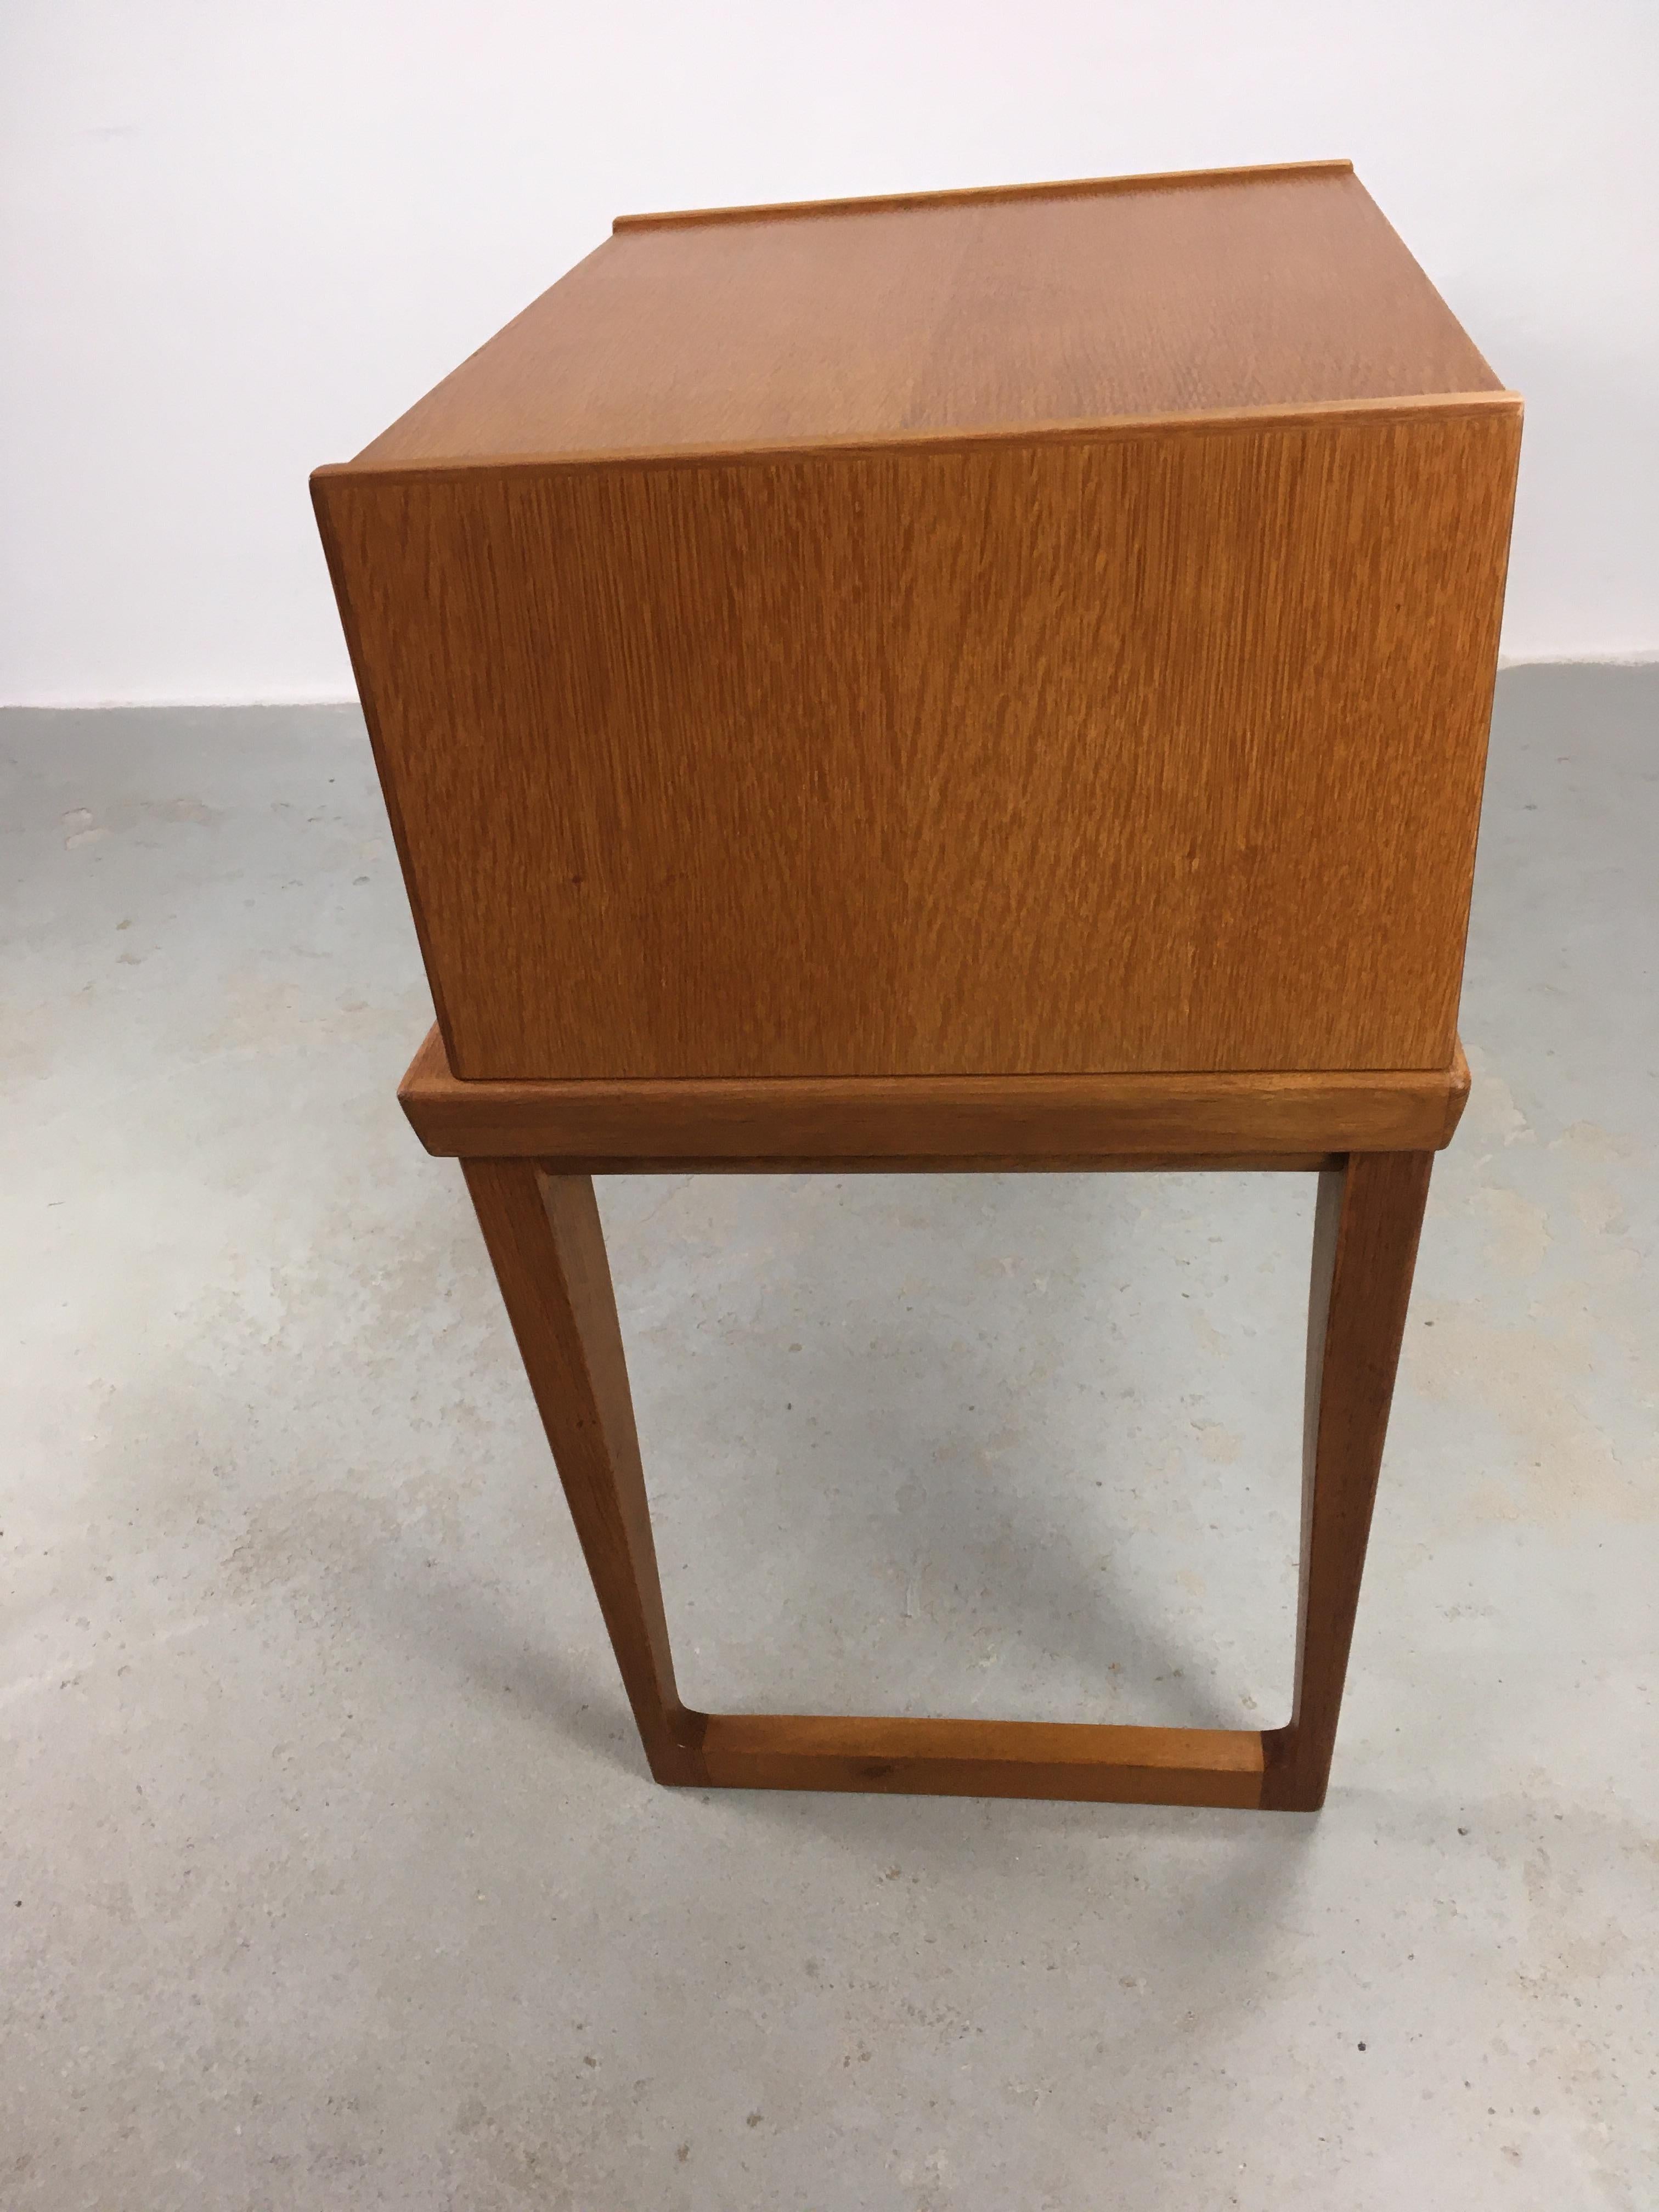 Restored and Refinished Kai Kristiansen Oak Side Table with Chest of Drawers For Sale 1